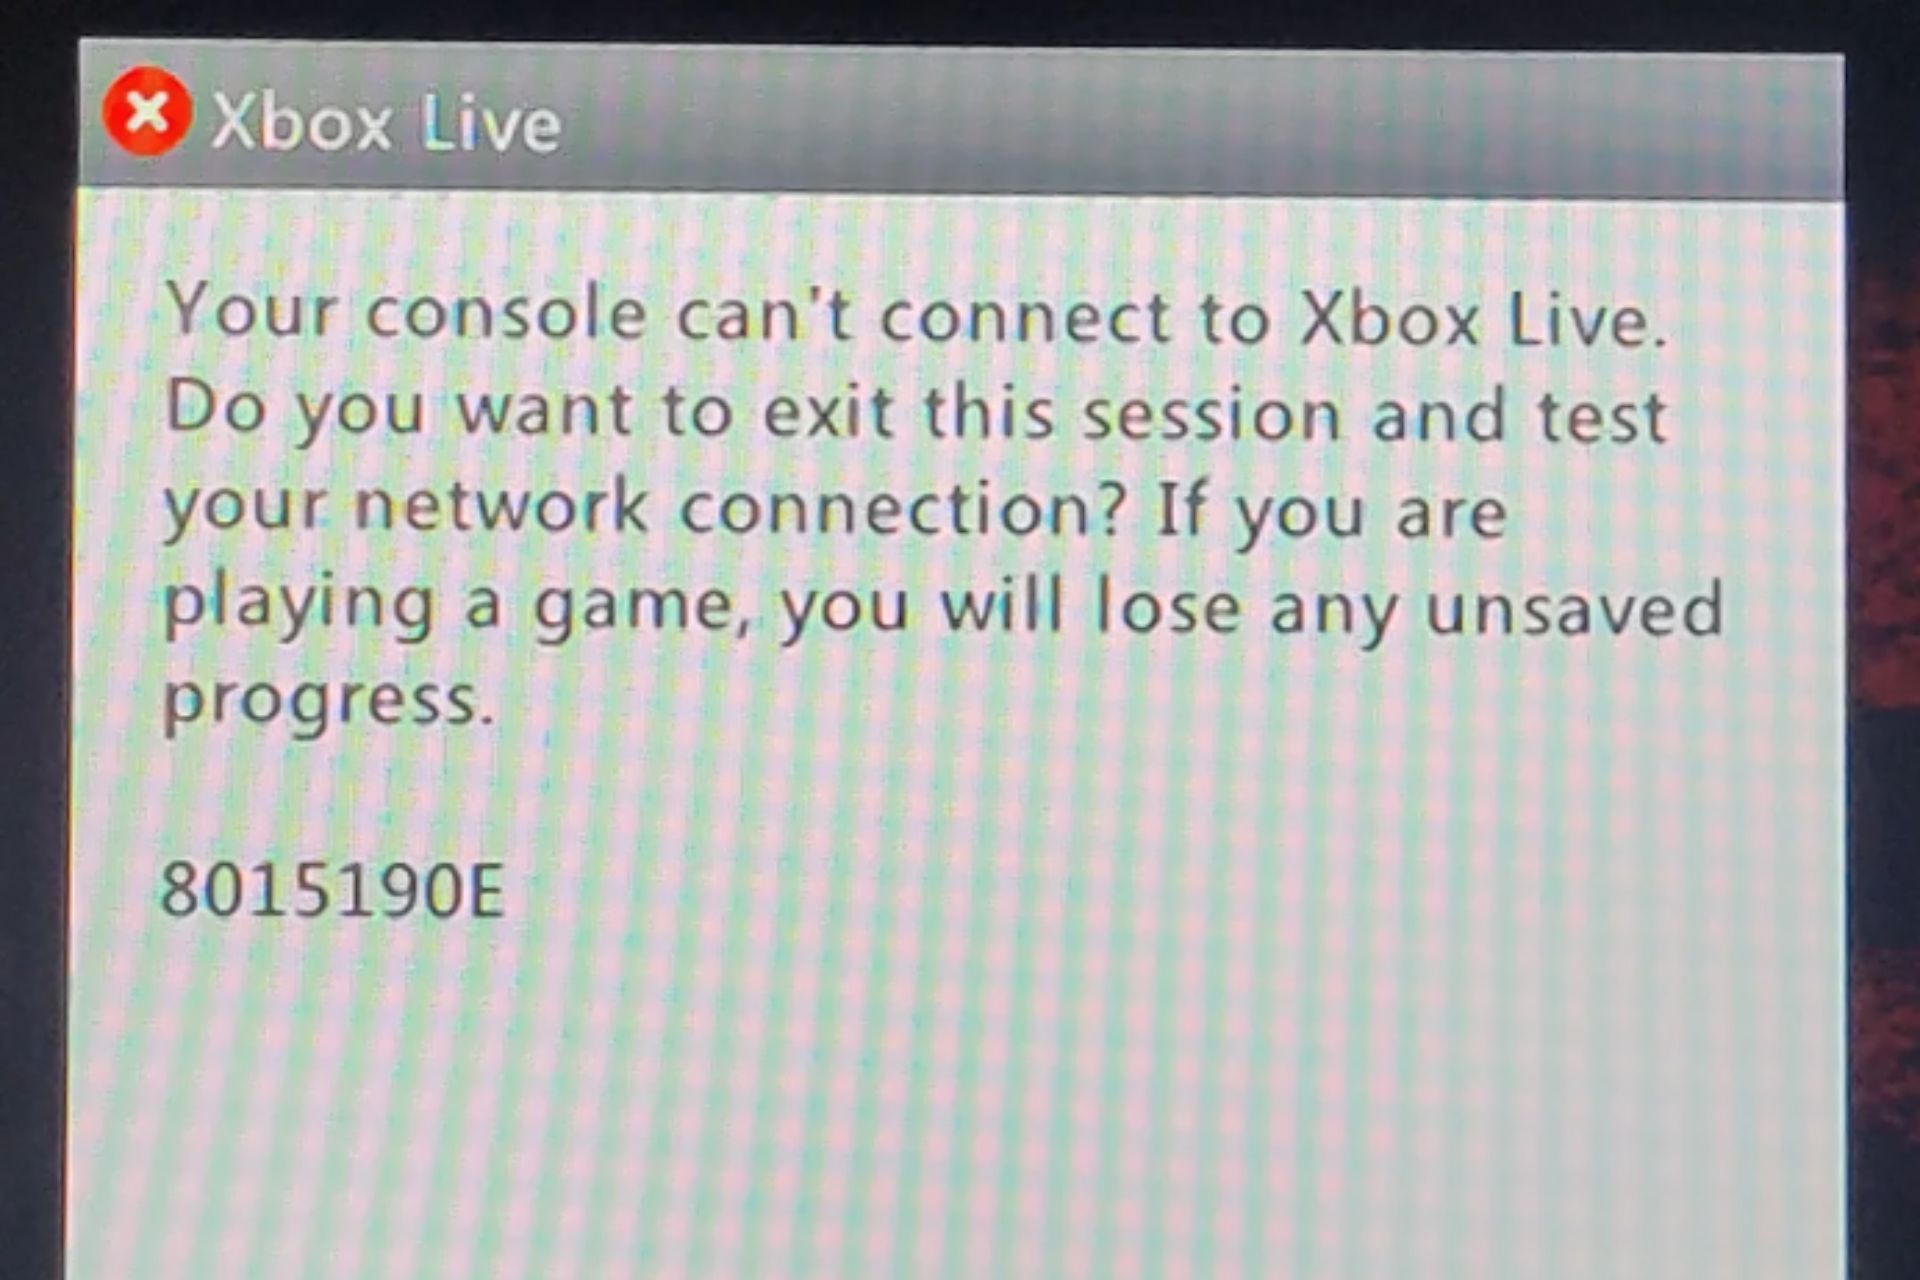 Accessing Xbox Live from the Xbox 360 account is currently bugged, but Microsoft is working on a fix